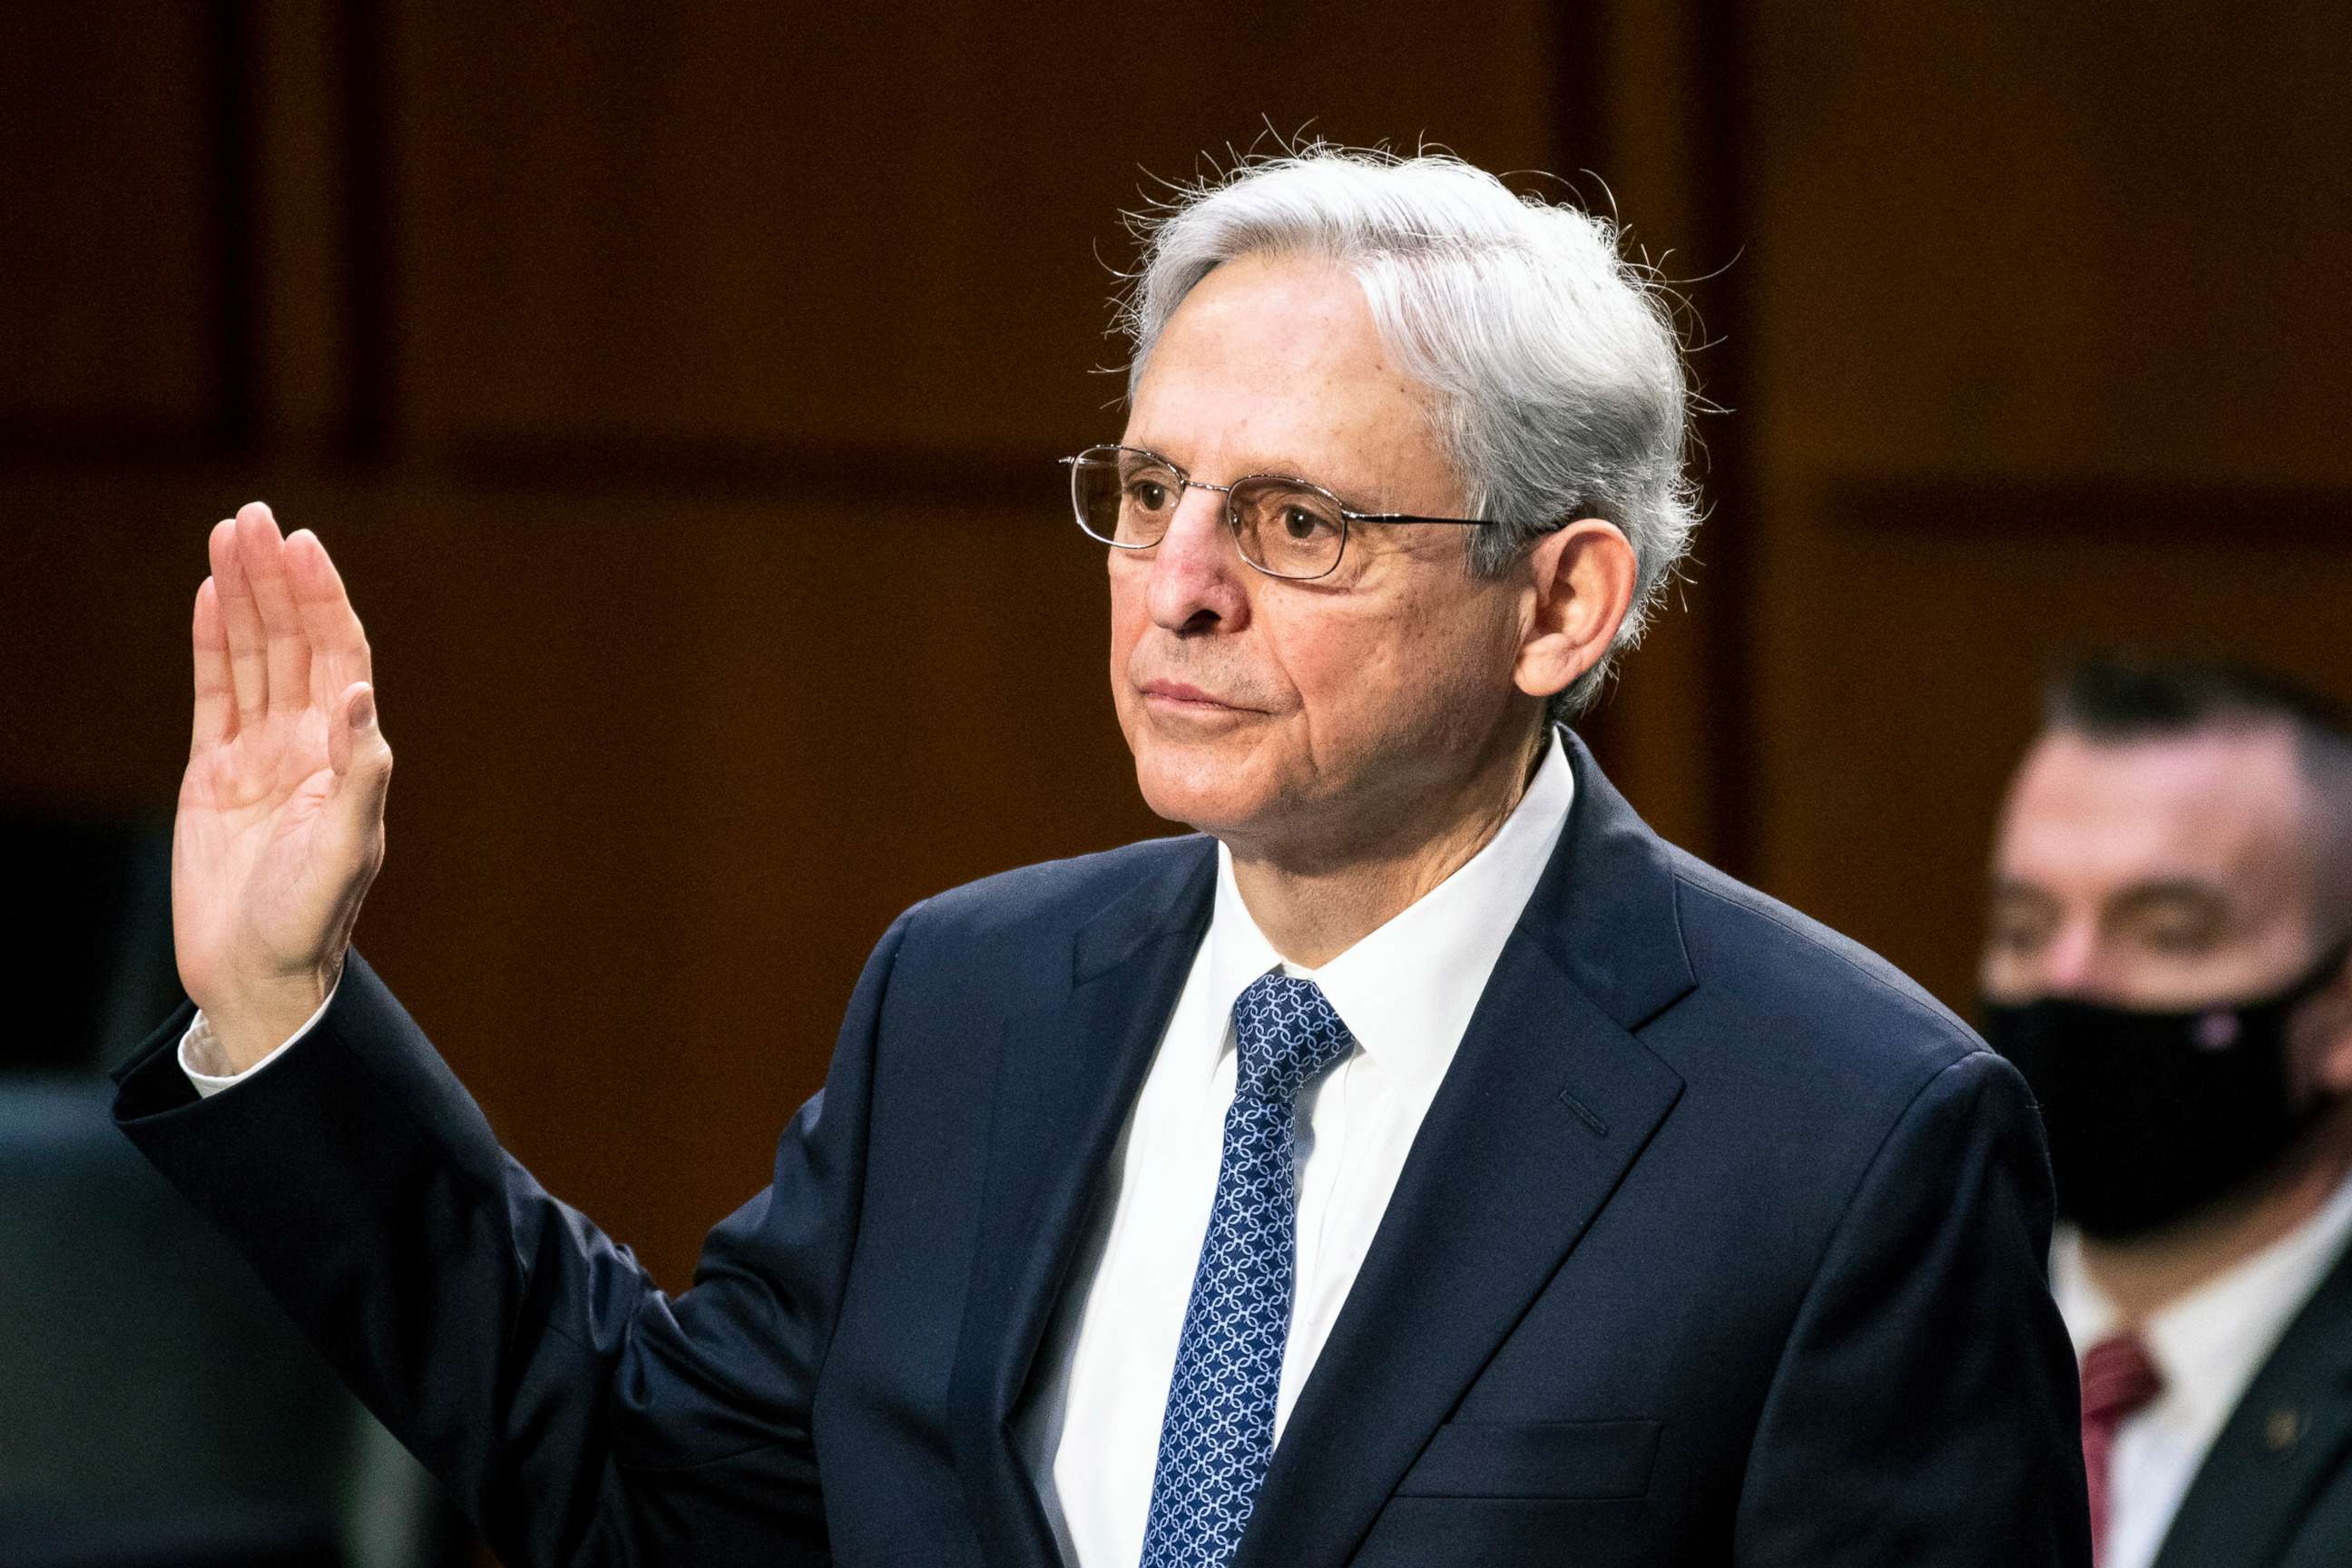 PHOTO: Judge Merrick Garland, nominee to be Attorney General, is sworn in at his confirmation hearing before the Senate Judicary Committee, Feb. 22, 2021, on Capitol Hill in Washington.